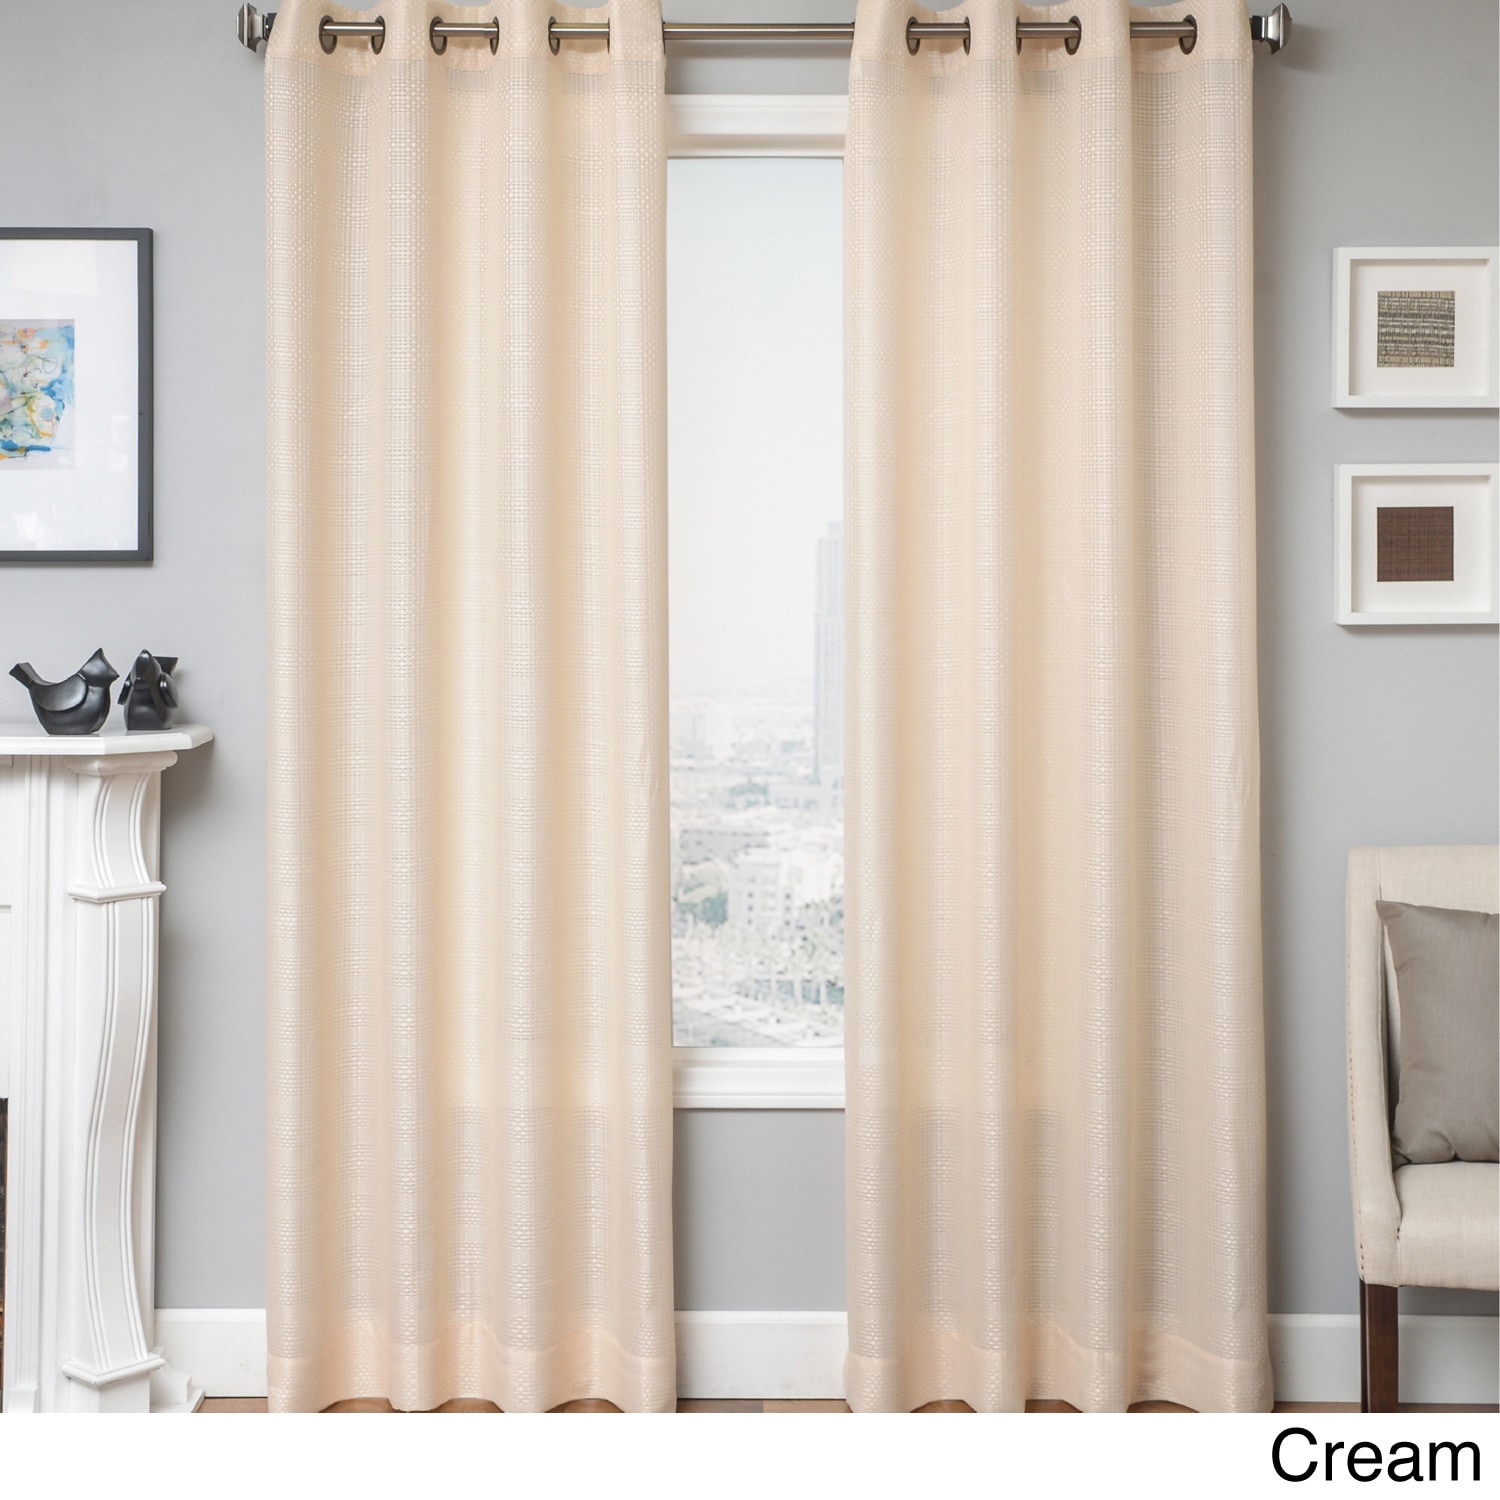 Softline Home Fashions Bally Grommet Top Curtain Panel Cream Size 54 x 84